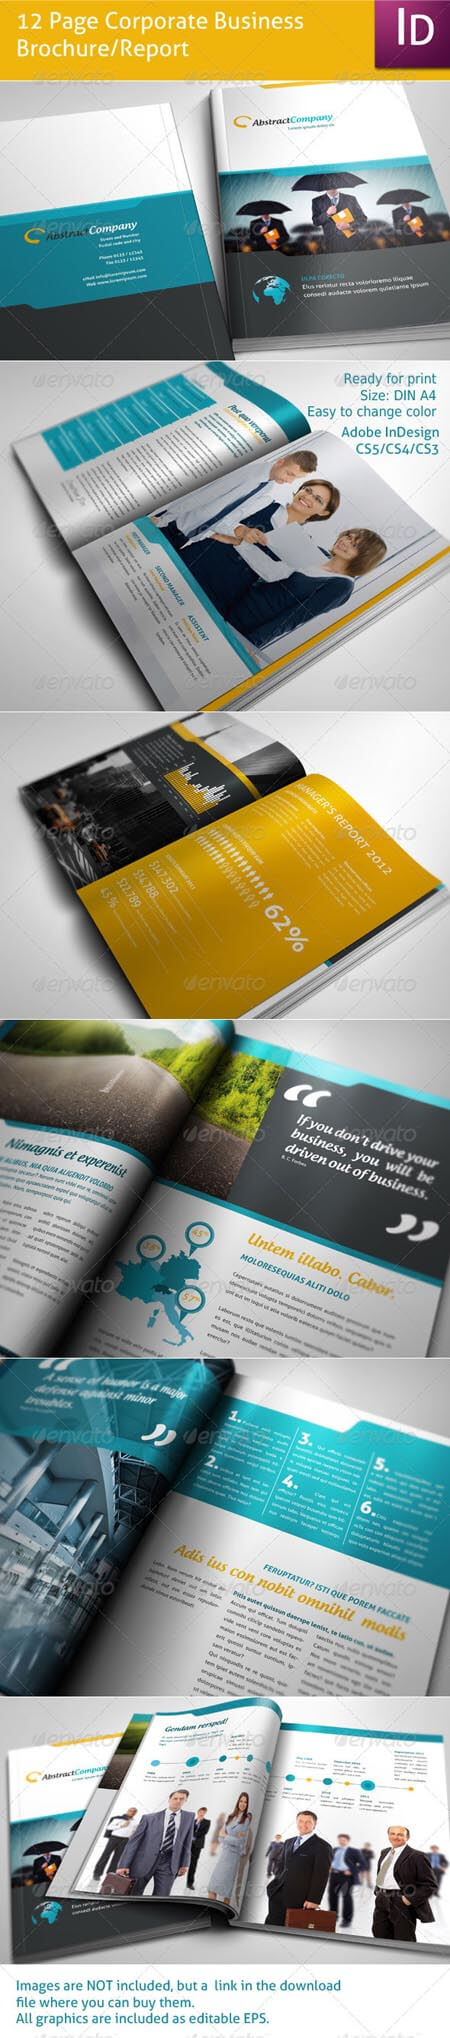 12 Page Brochure Template